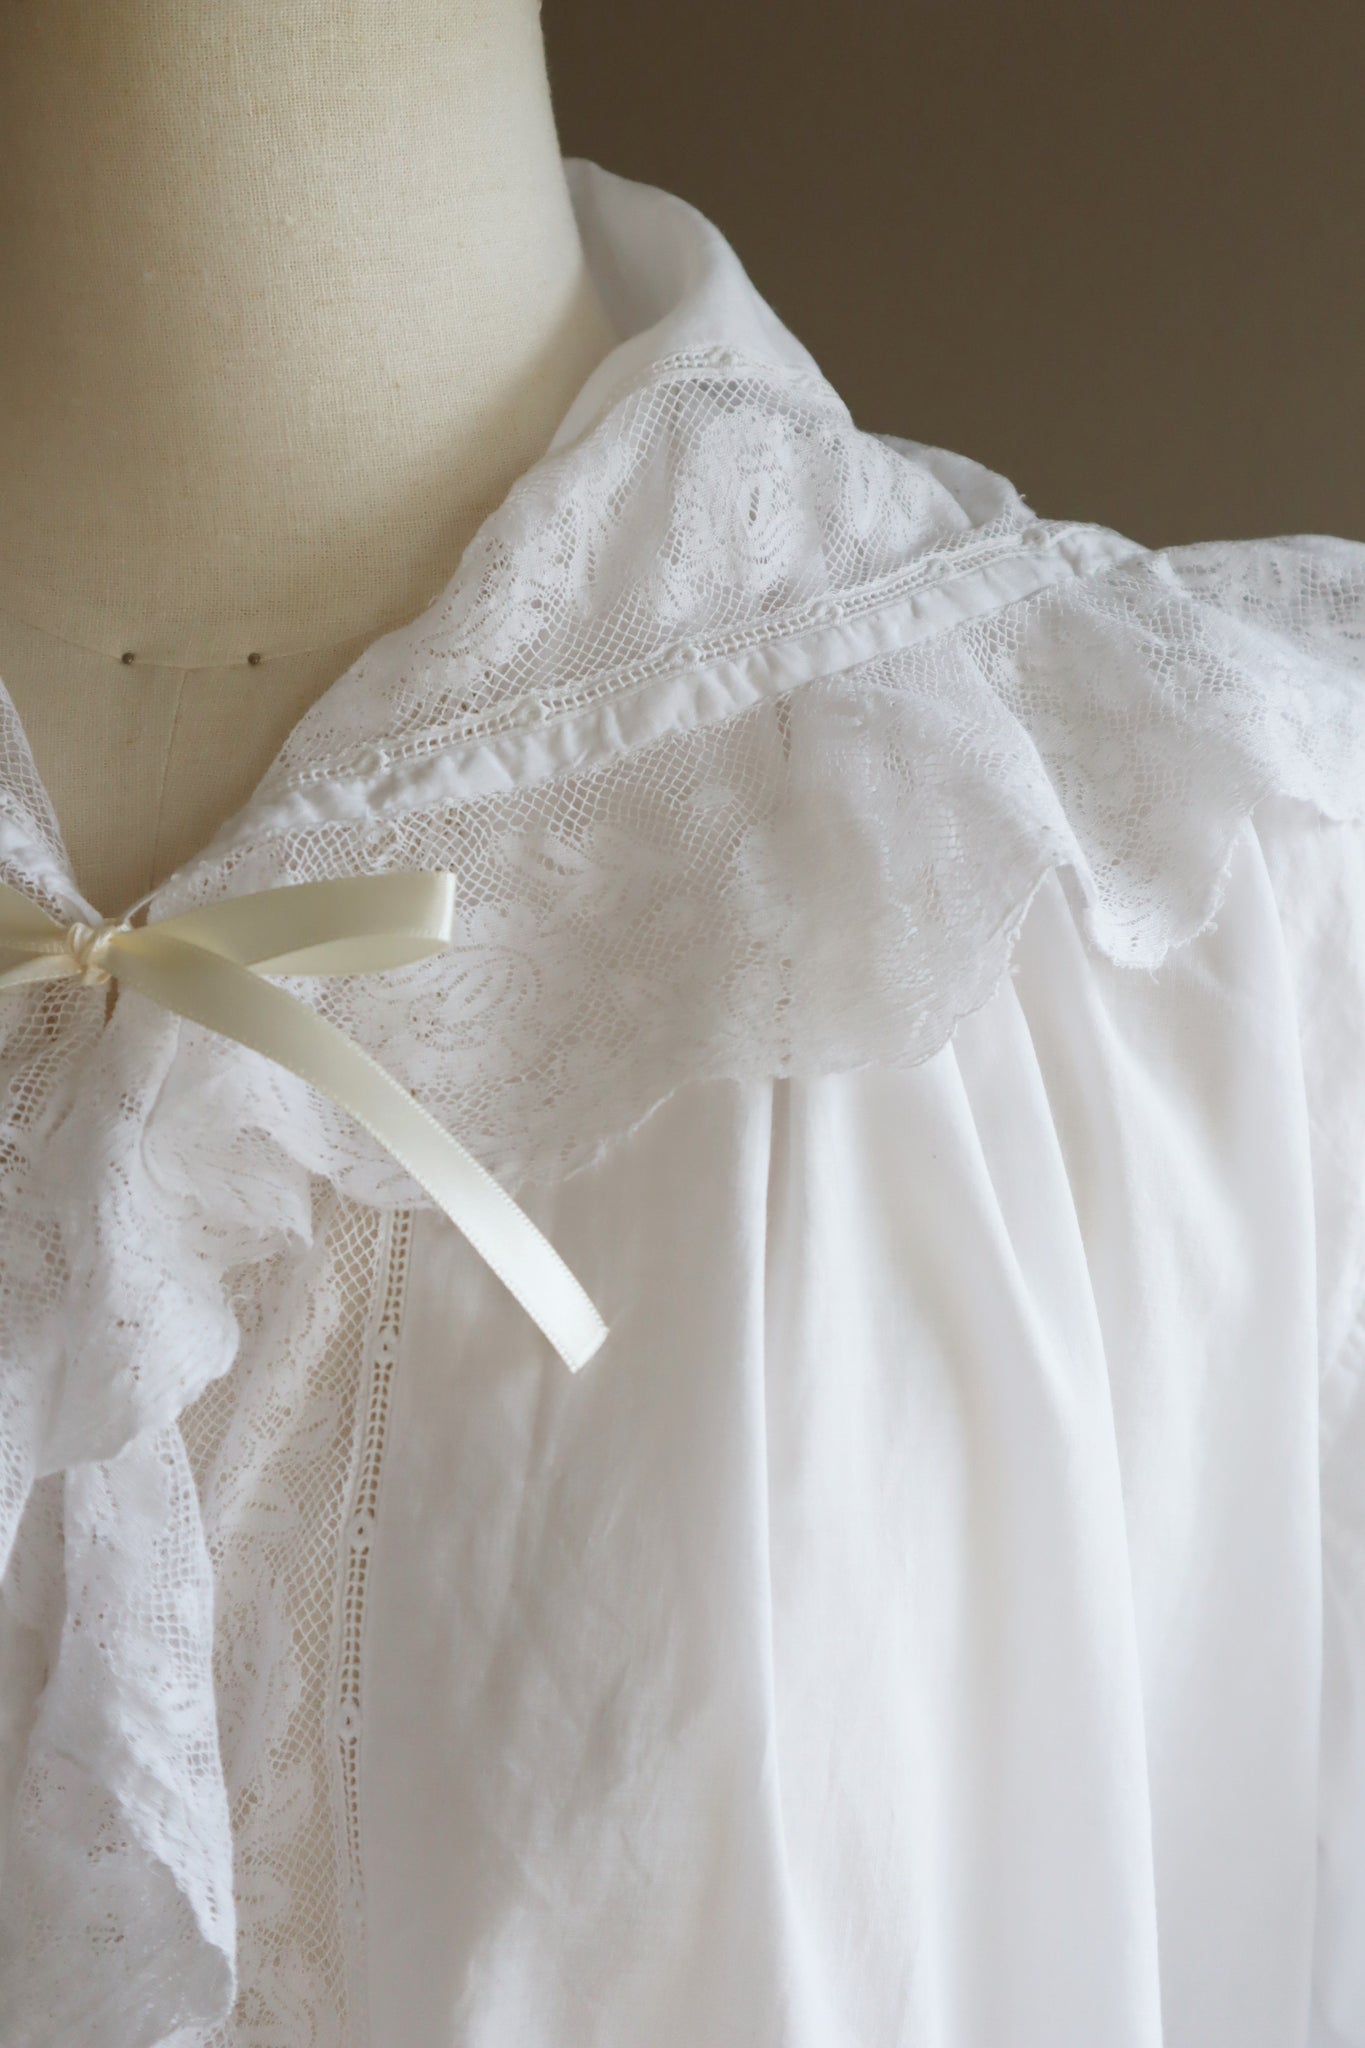 1900s French Sailor Collar White Cotton Long Dress